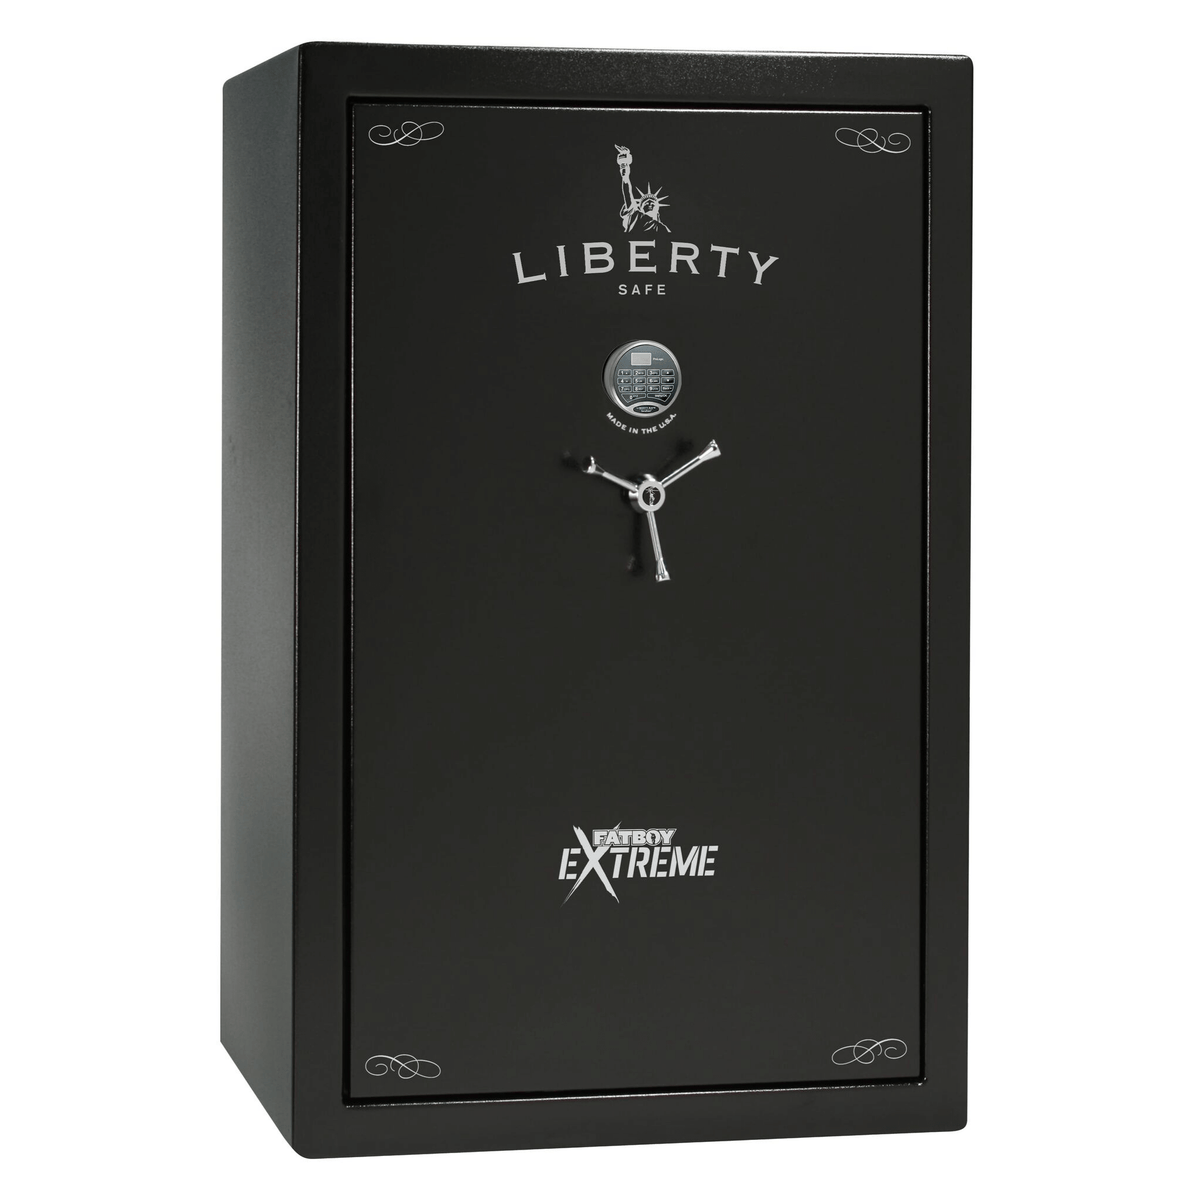 Lincoln Fatboy Extreme 64XT Safe in Textured Black with Chrome Electronic Lock.